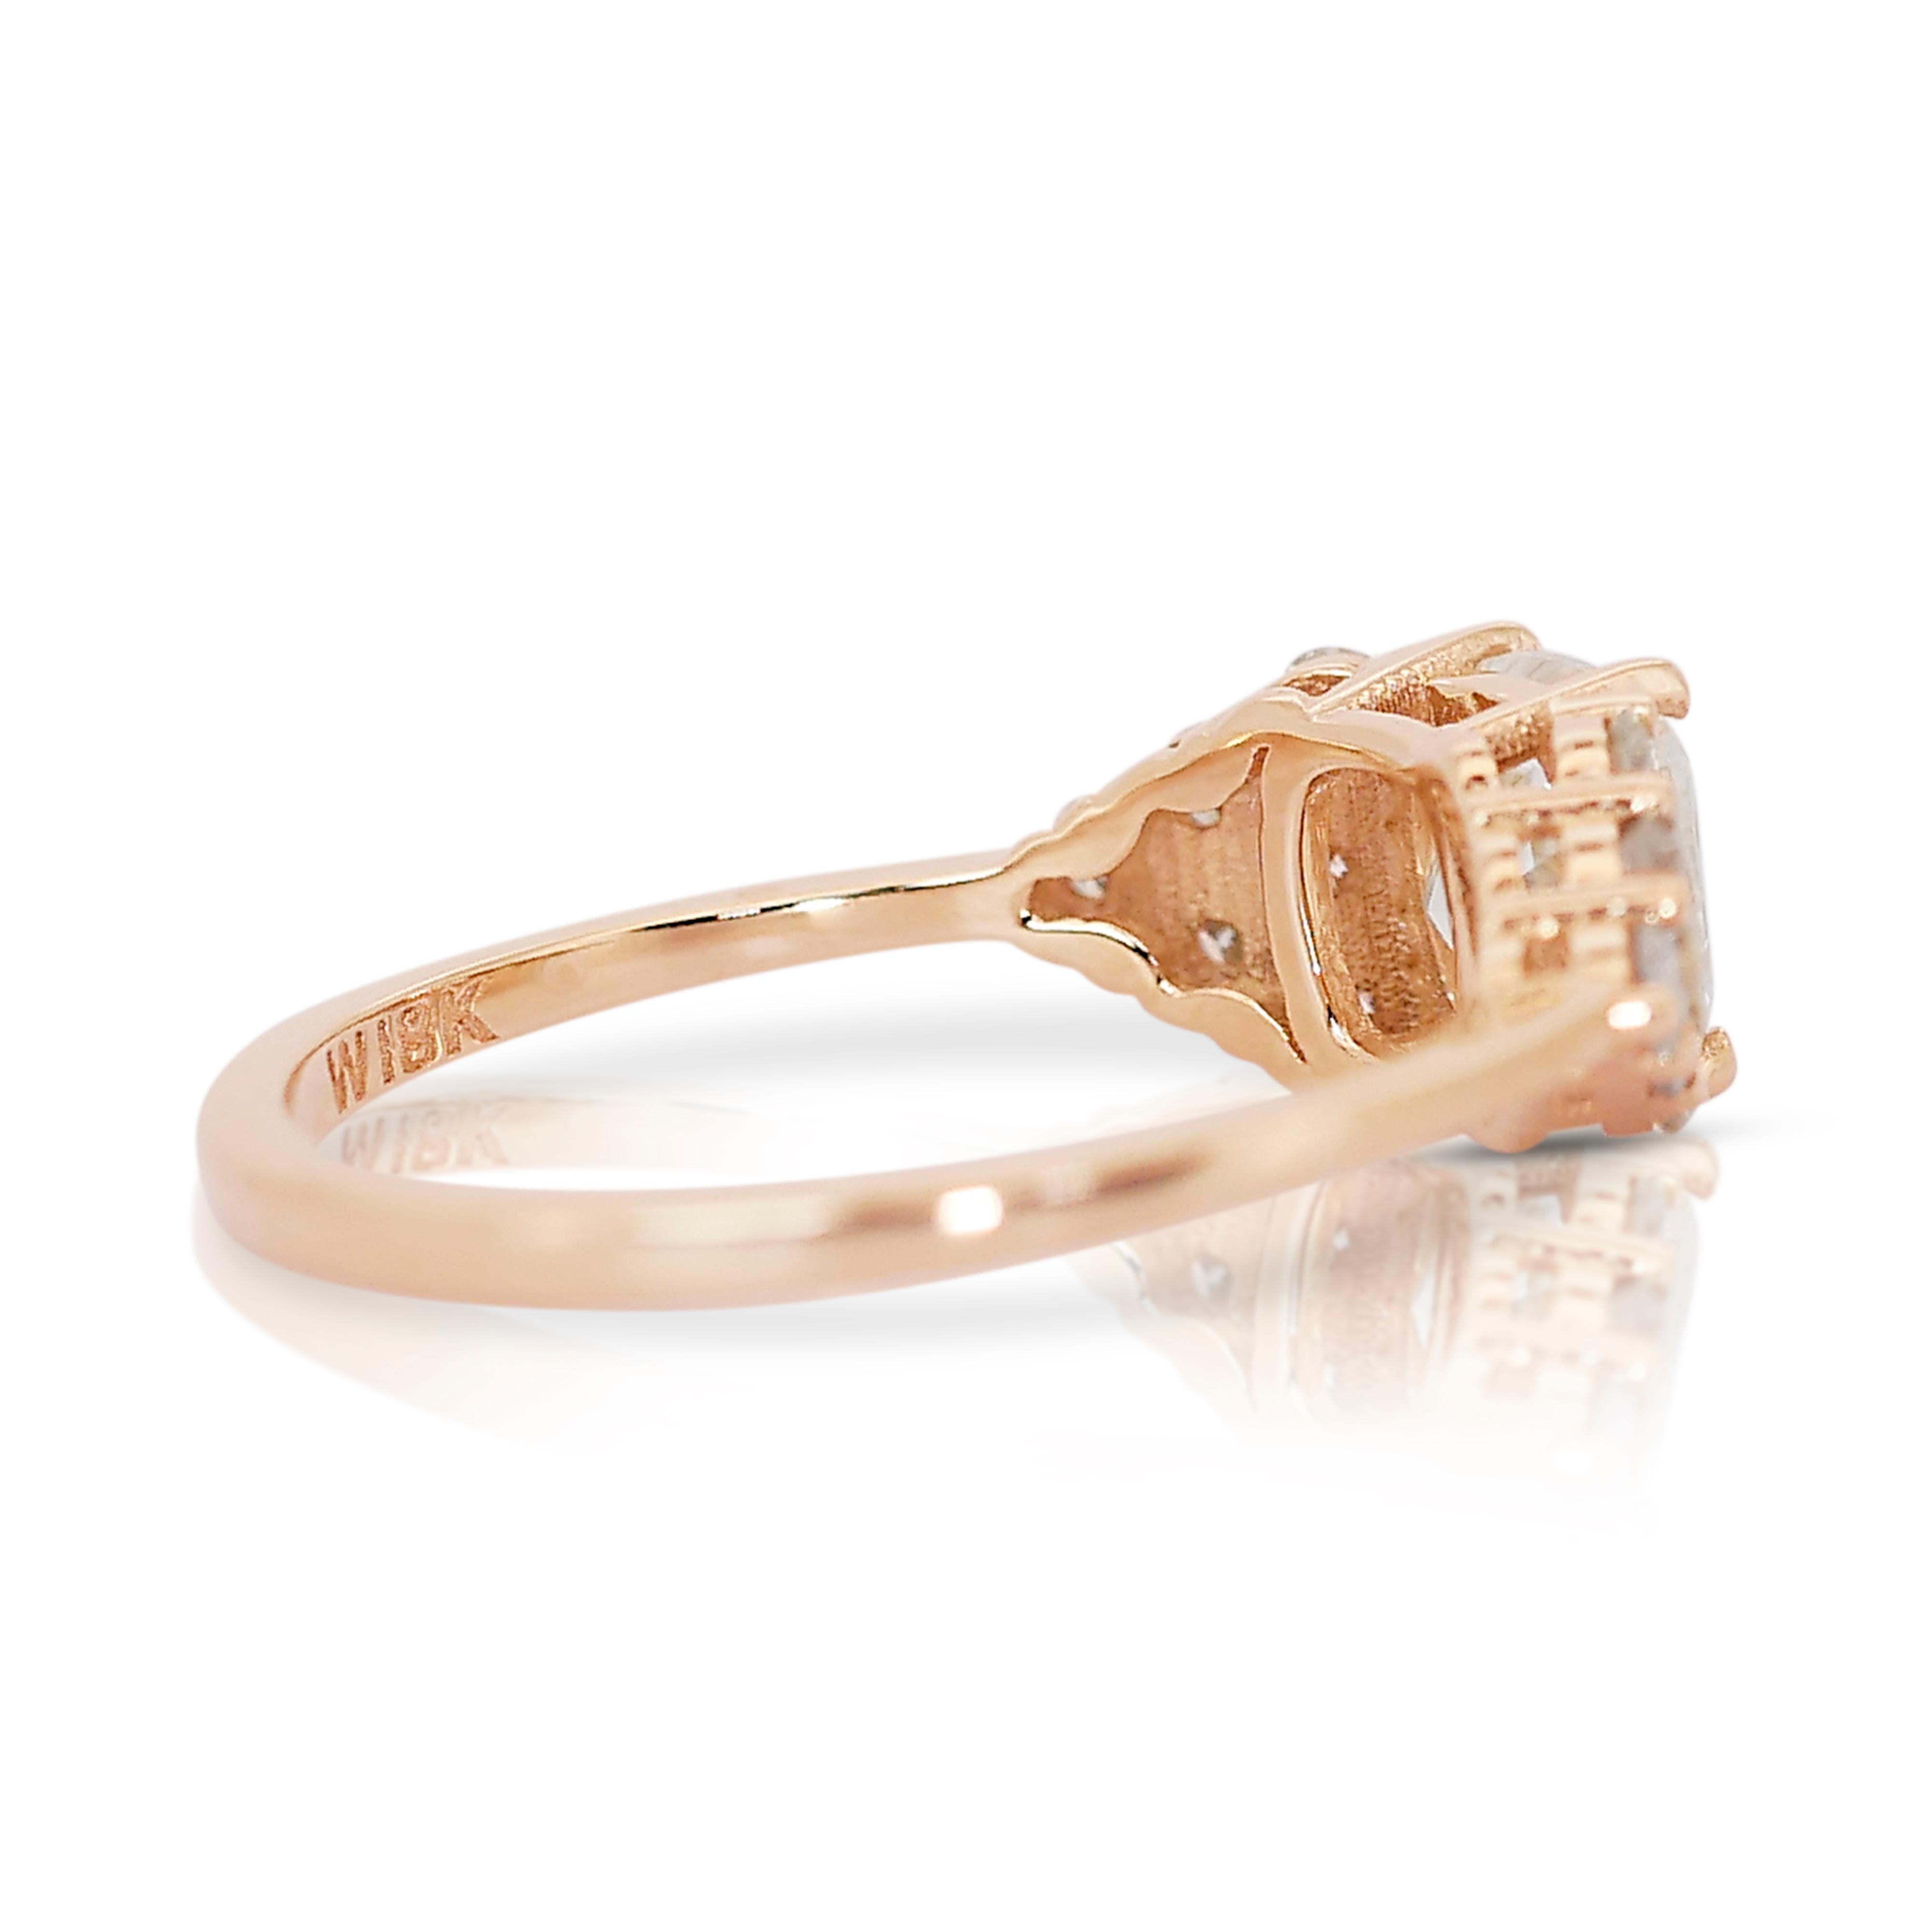 Luminous 1.41ct Diamonds Pave Ring in 18k Yellow Gold - IGI Certified In New Condition For Sale In רמת גן, IL